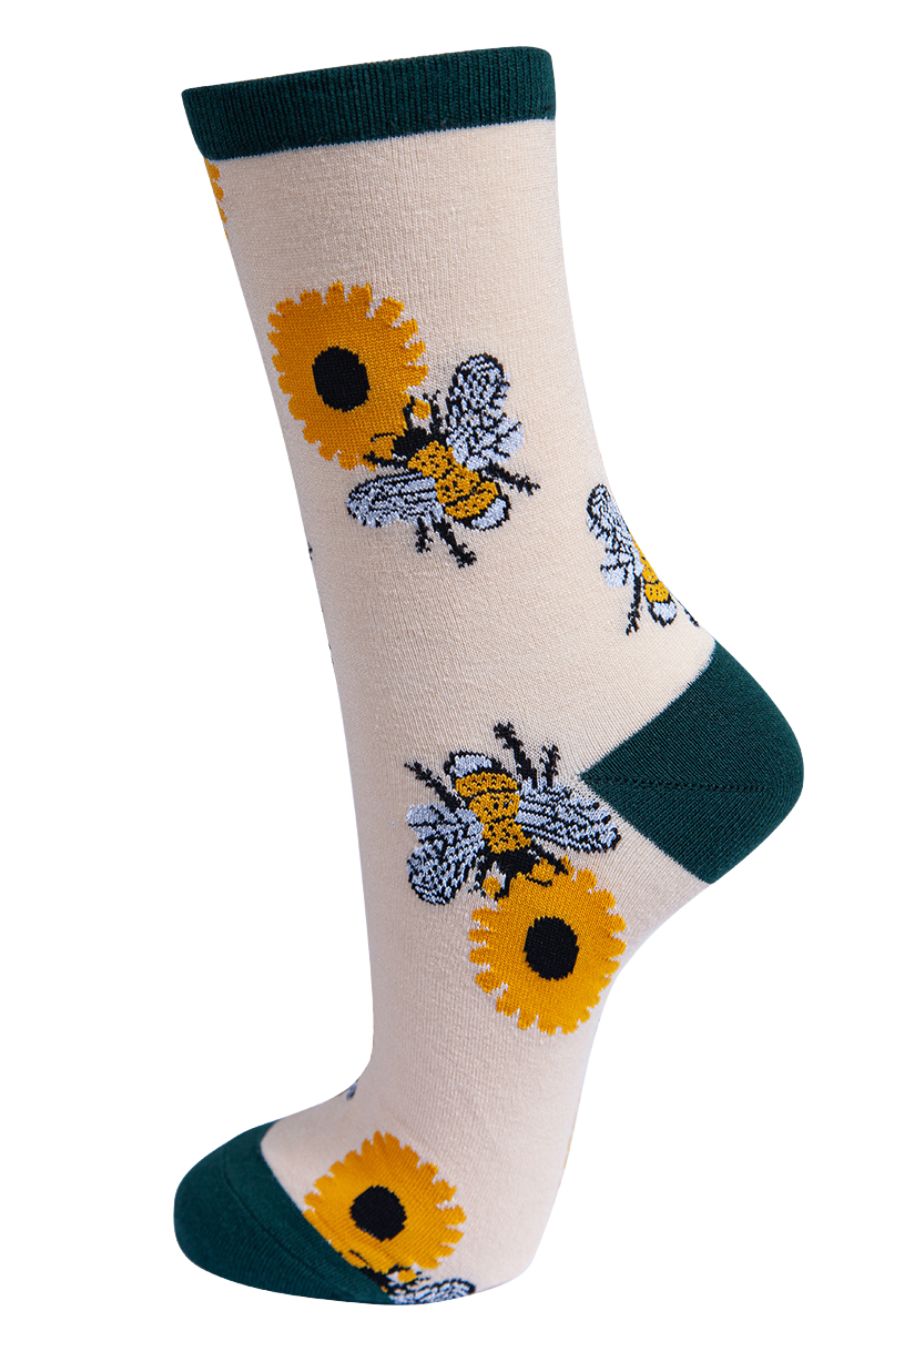 cream, green ankle socks with bees and yellow sunflowers